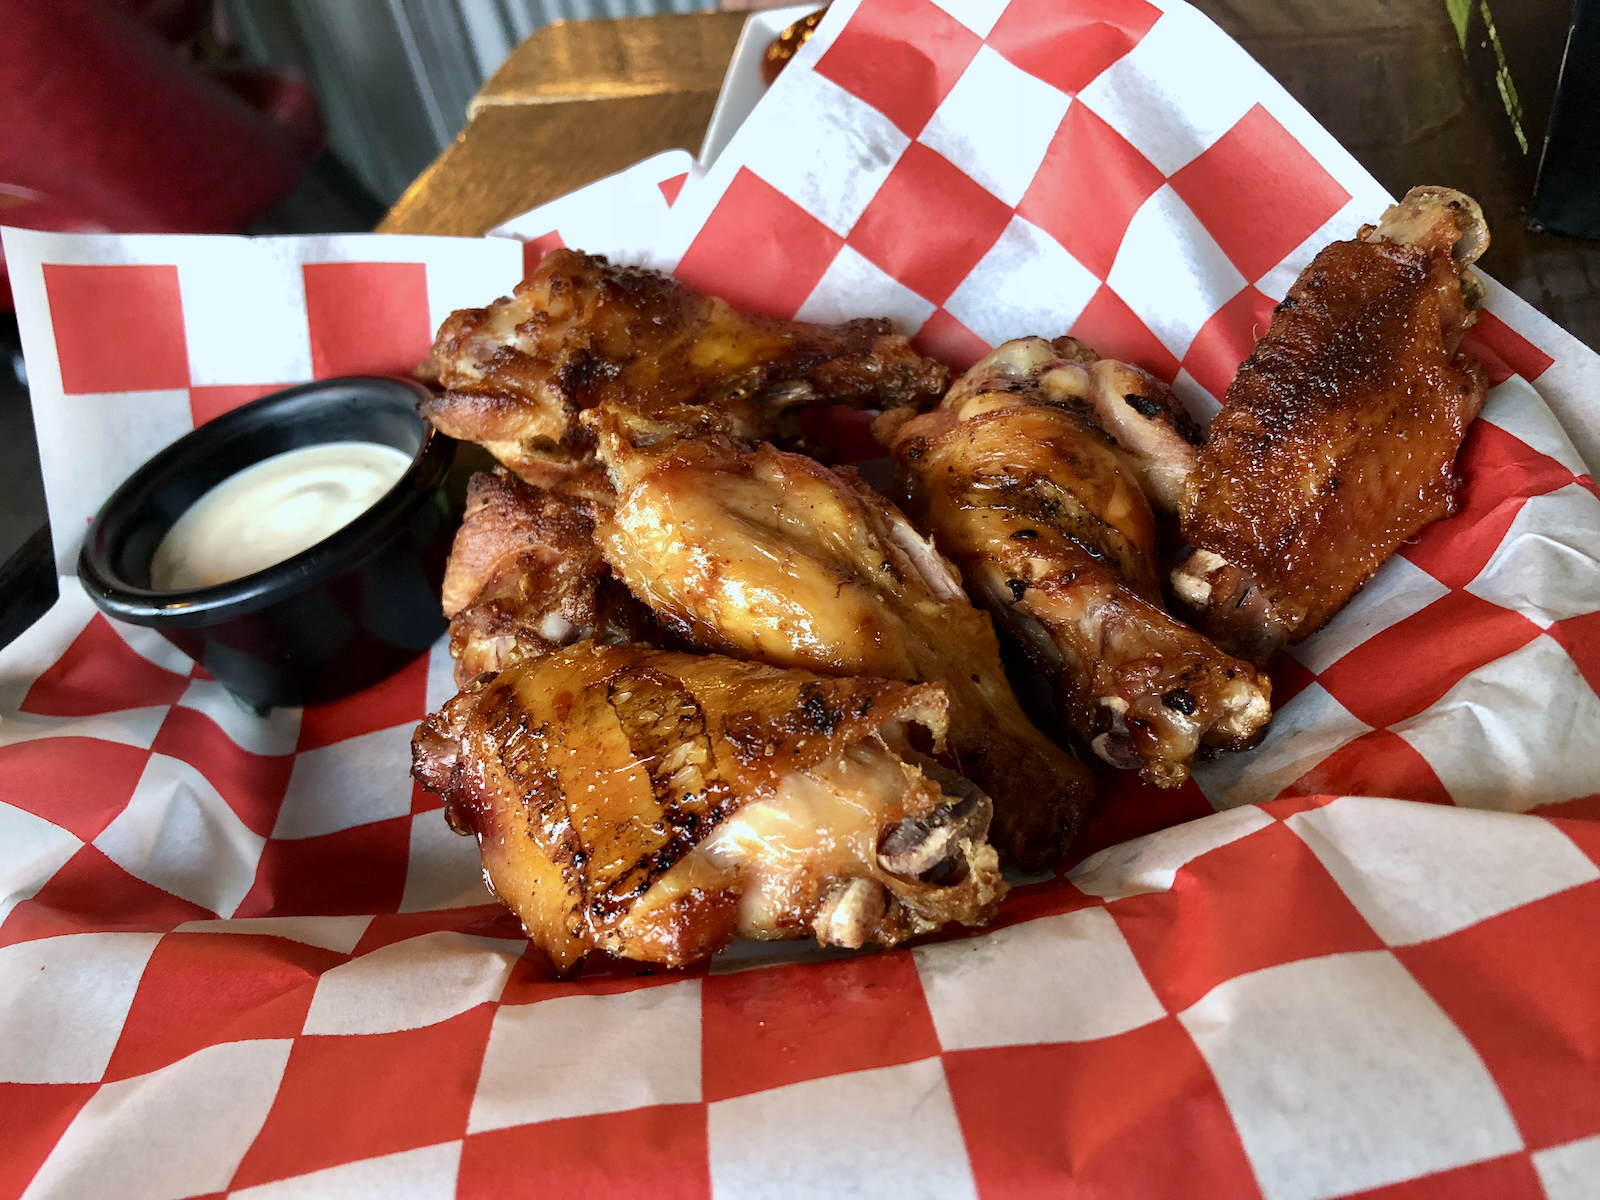 Double B's smoked wings